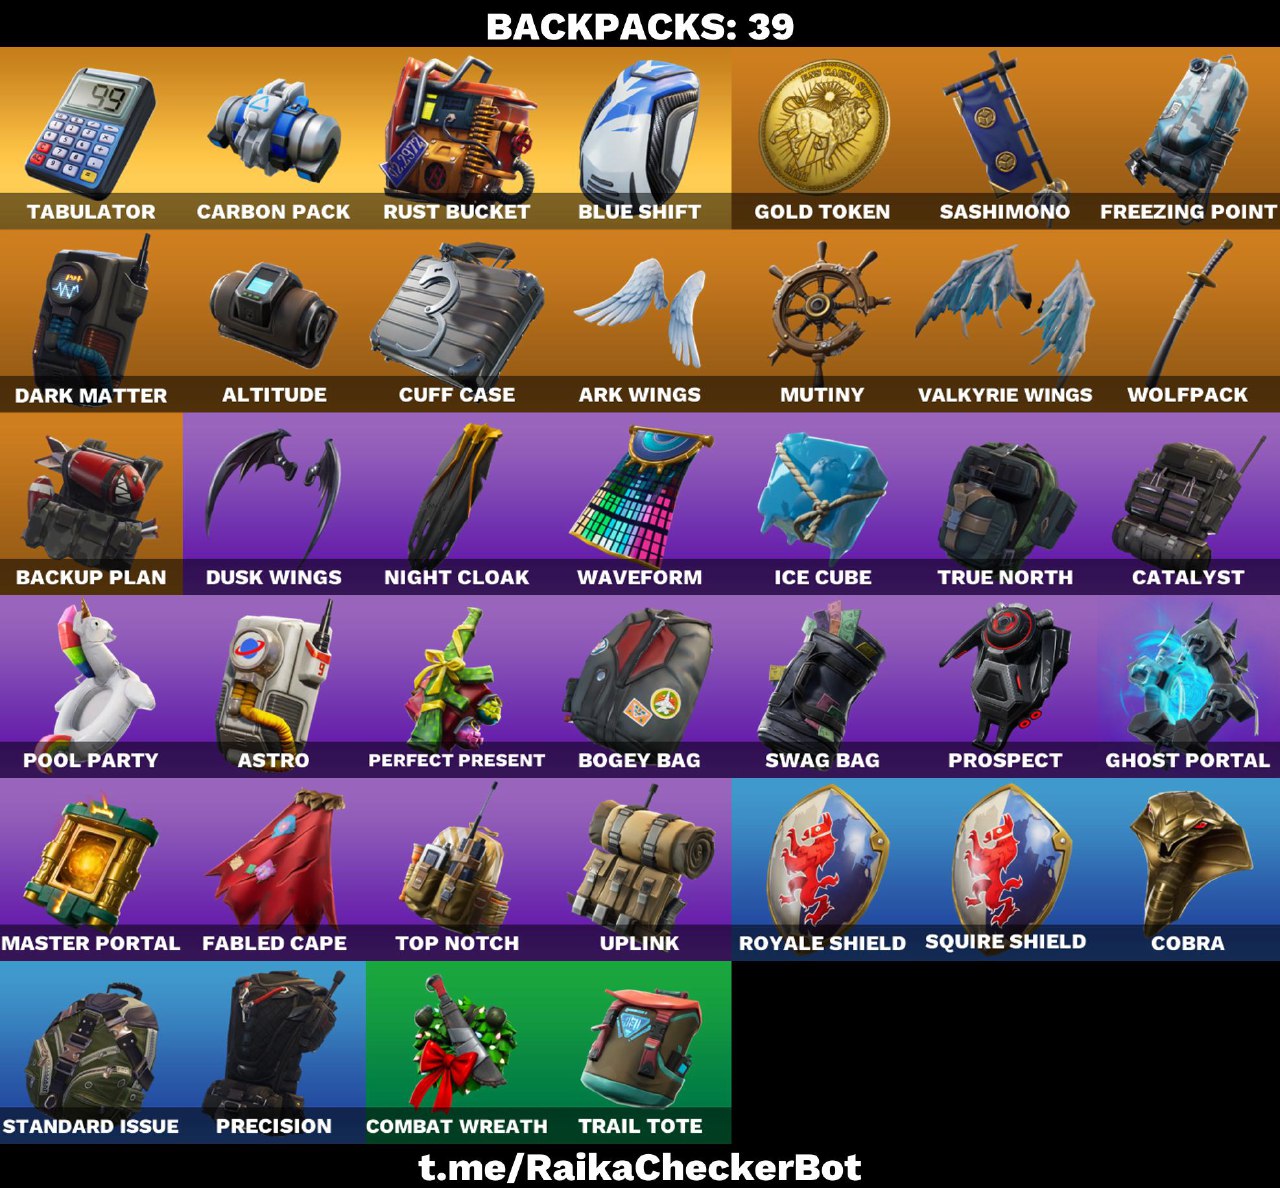 FA | 52 OUTFITS | BLUE SQUIRE | ROYALE KNIGHT | HAVOC | TAKE THE L | DRIFT | CALAMITY | BLACKHEART | HYBRID | SKULL TROOPER